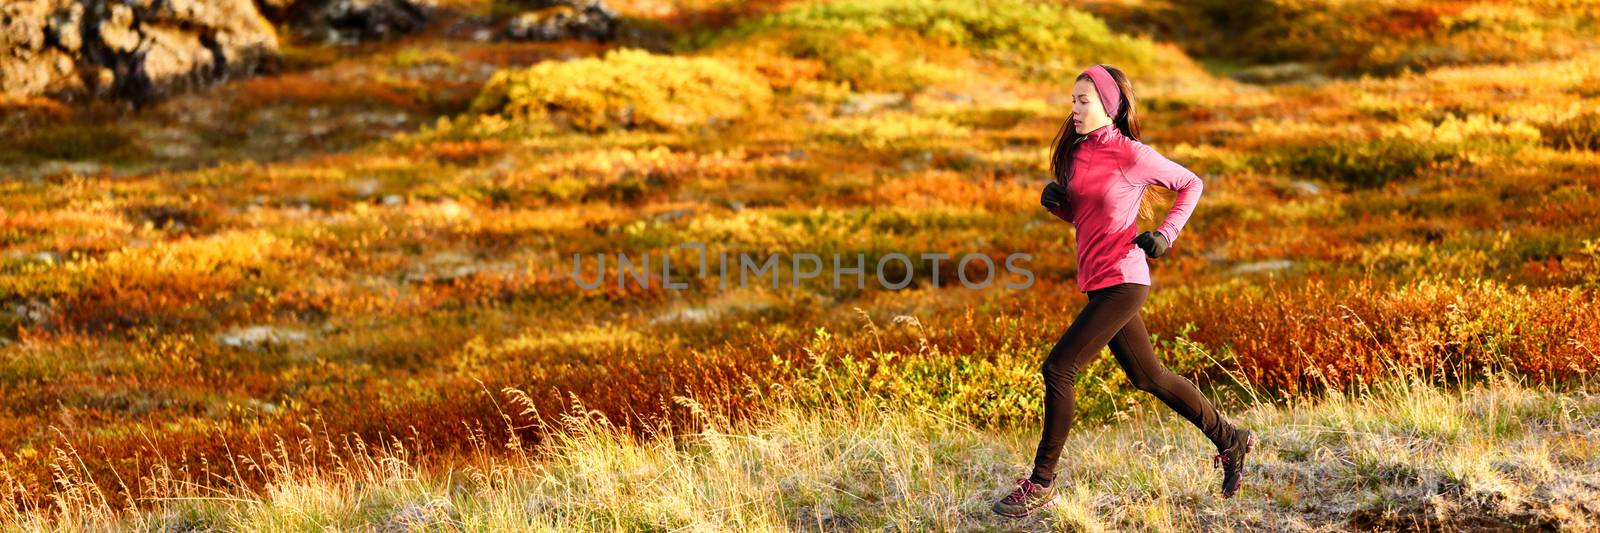 Healthy active lifestyle trail running athlete woman training outdoors doing cardio exercise in autumn foliage background. Panoramic banner. by Maridav